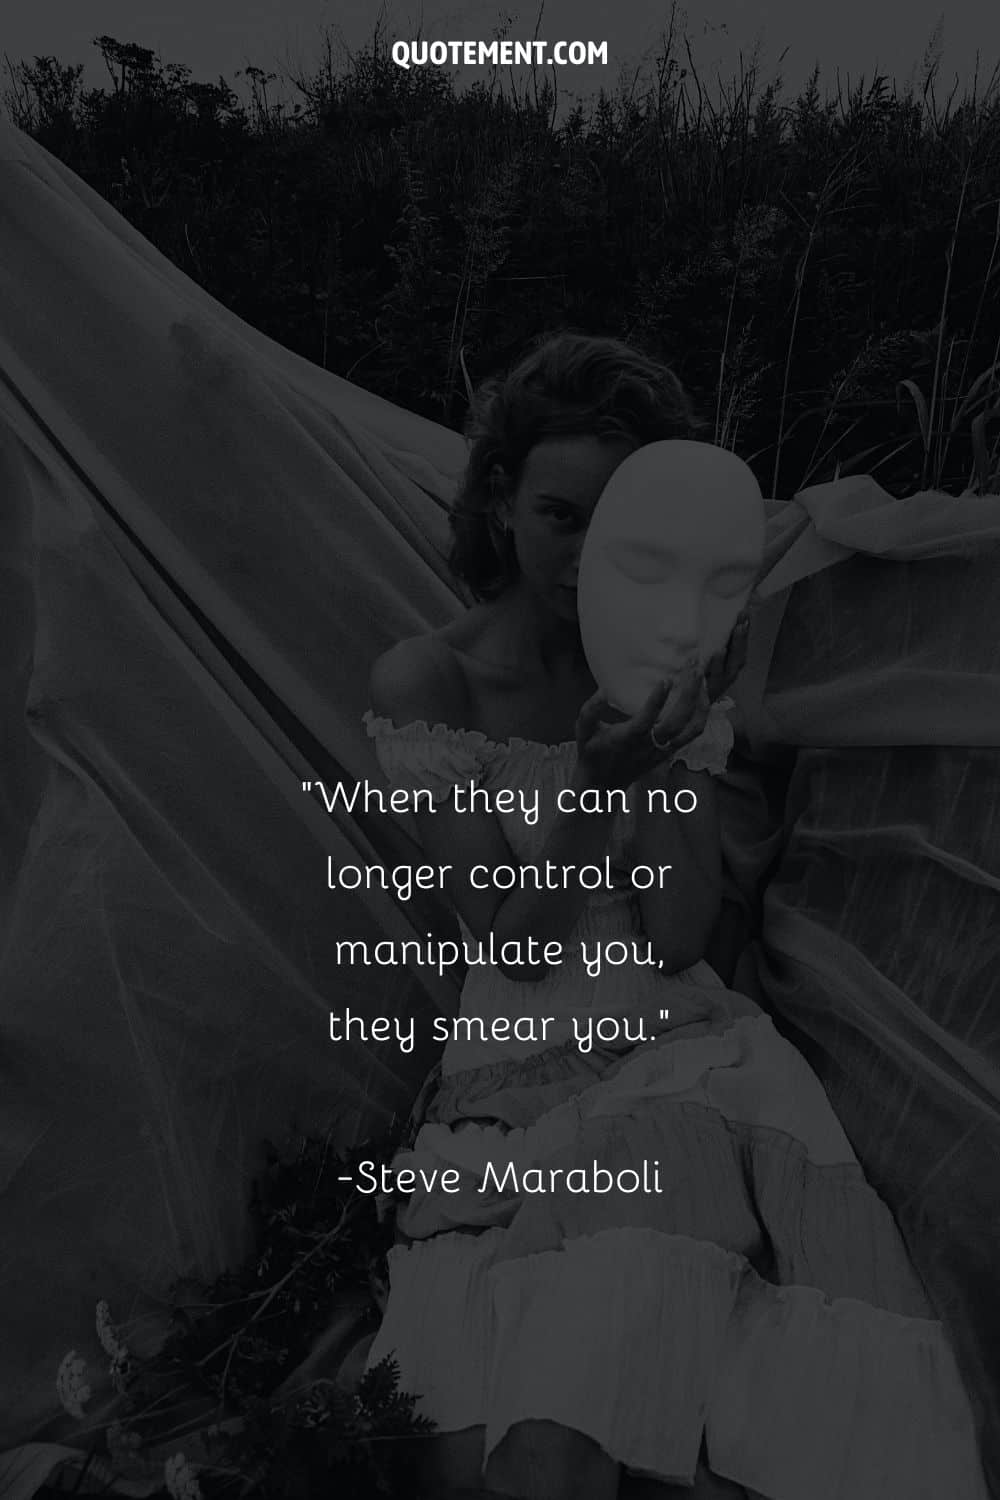 girl with a face mask image representing quote on manipulation